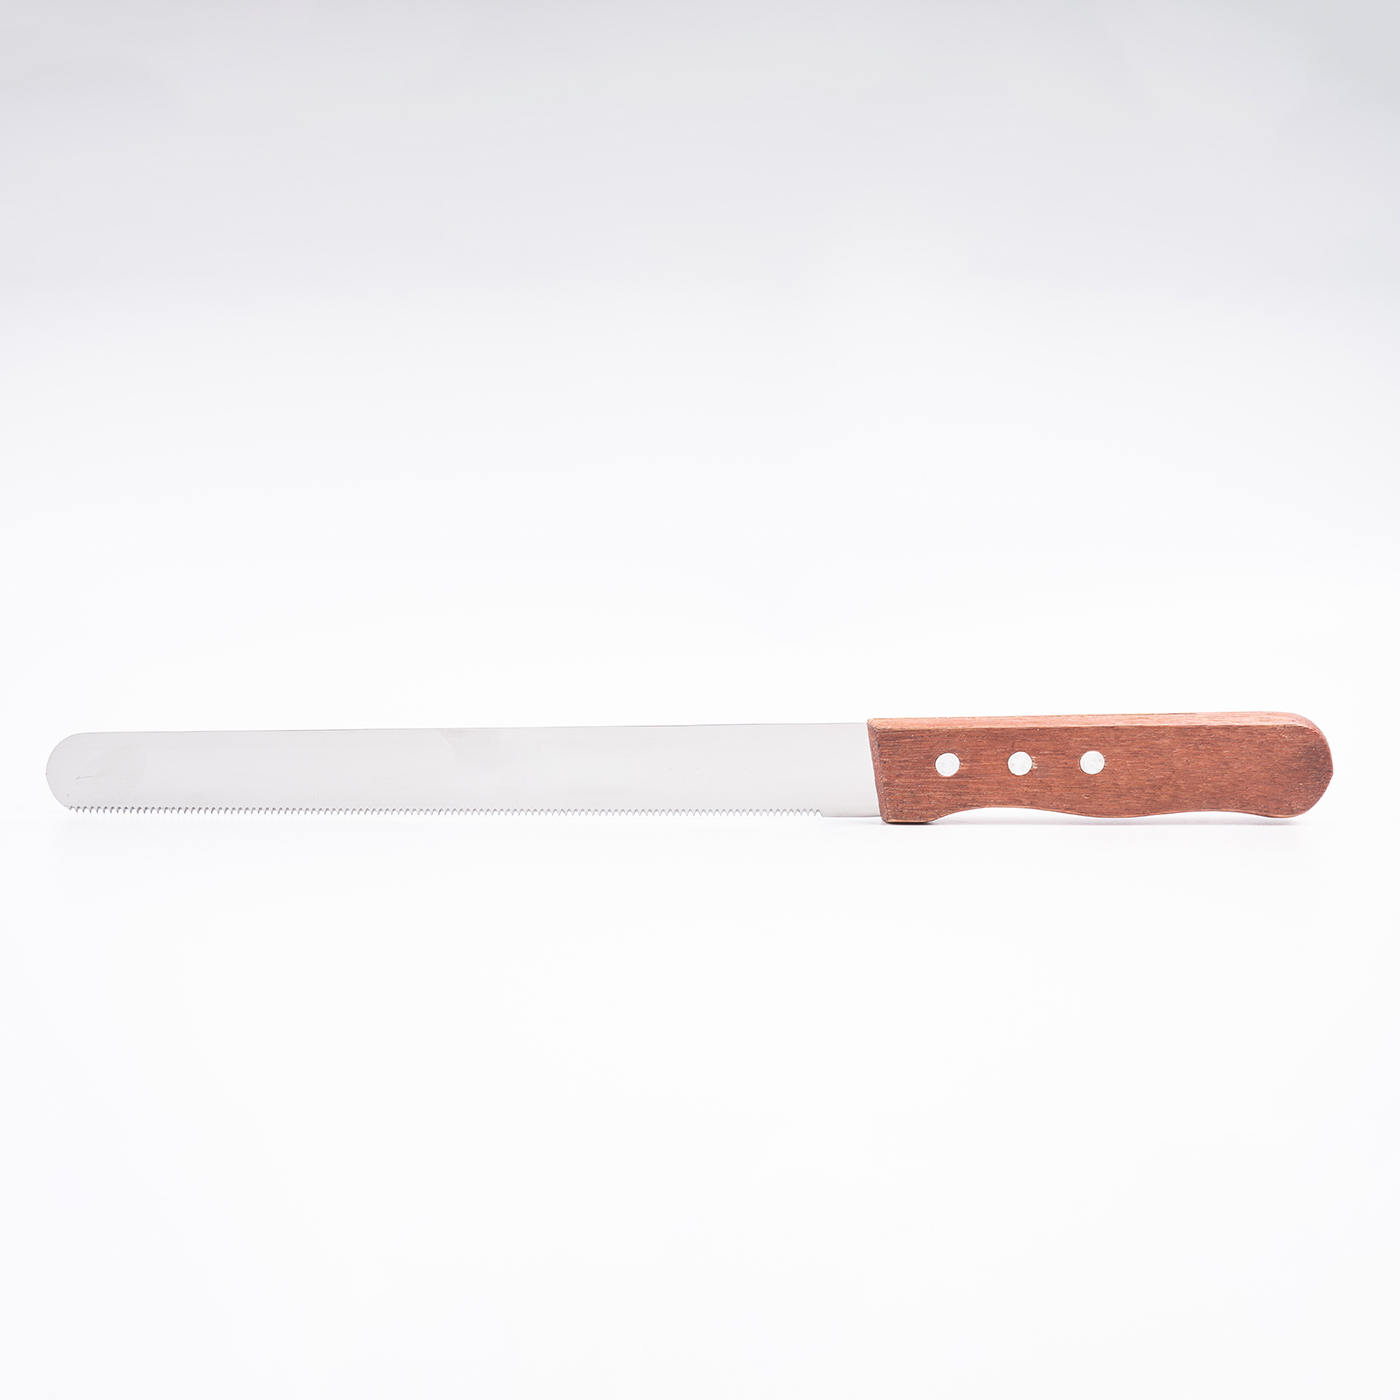 Stainless Steel Bread Knife With Wooden Handle3